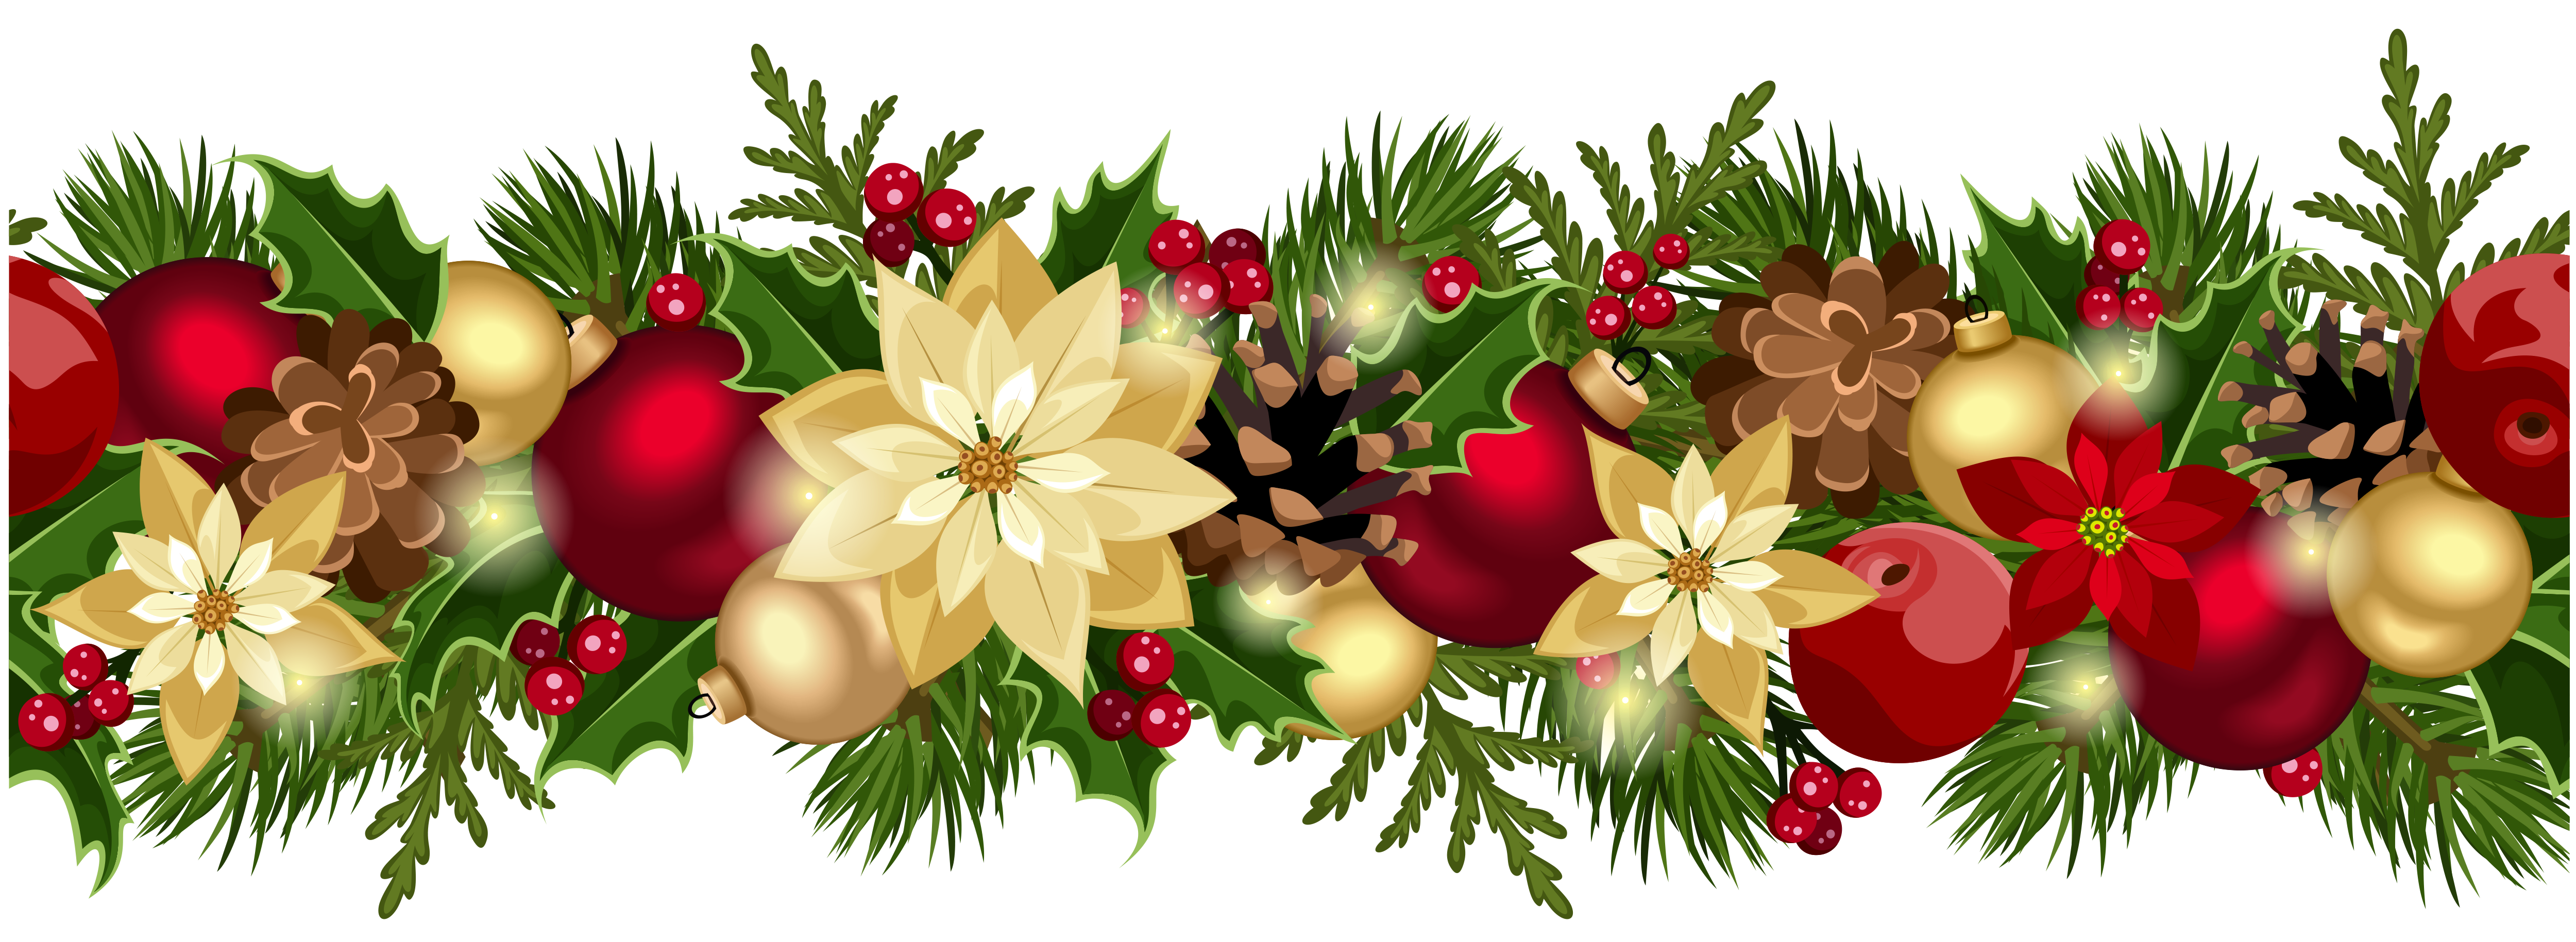 Holiday crafthubs background cover. Christmas garland border png